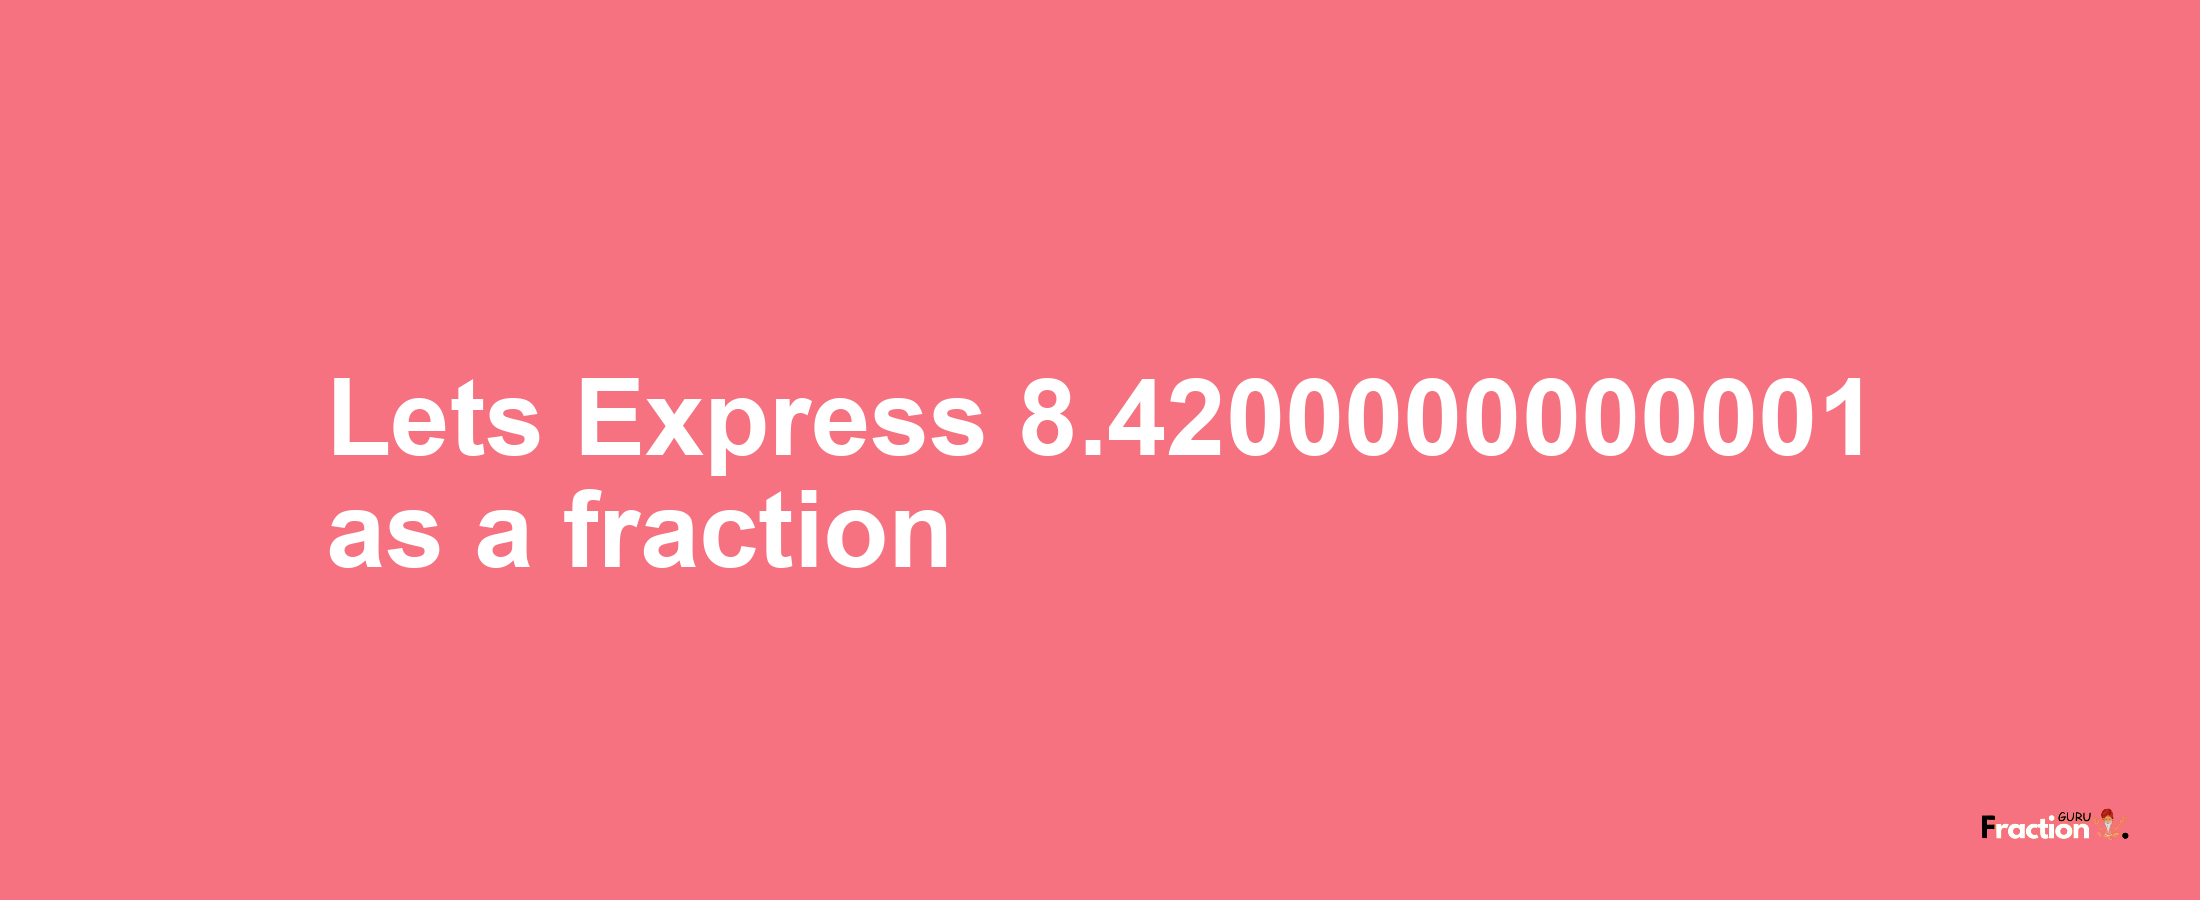 Lets Express 8.4200000000001 as afraction